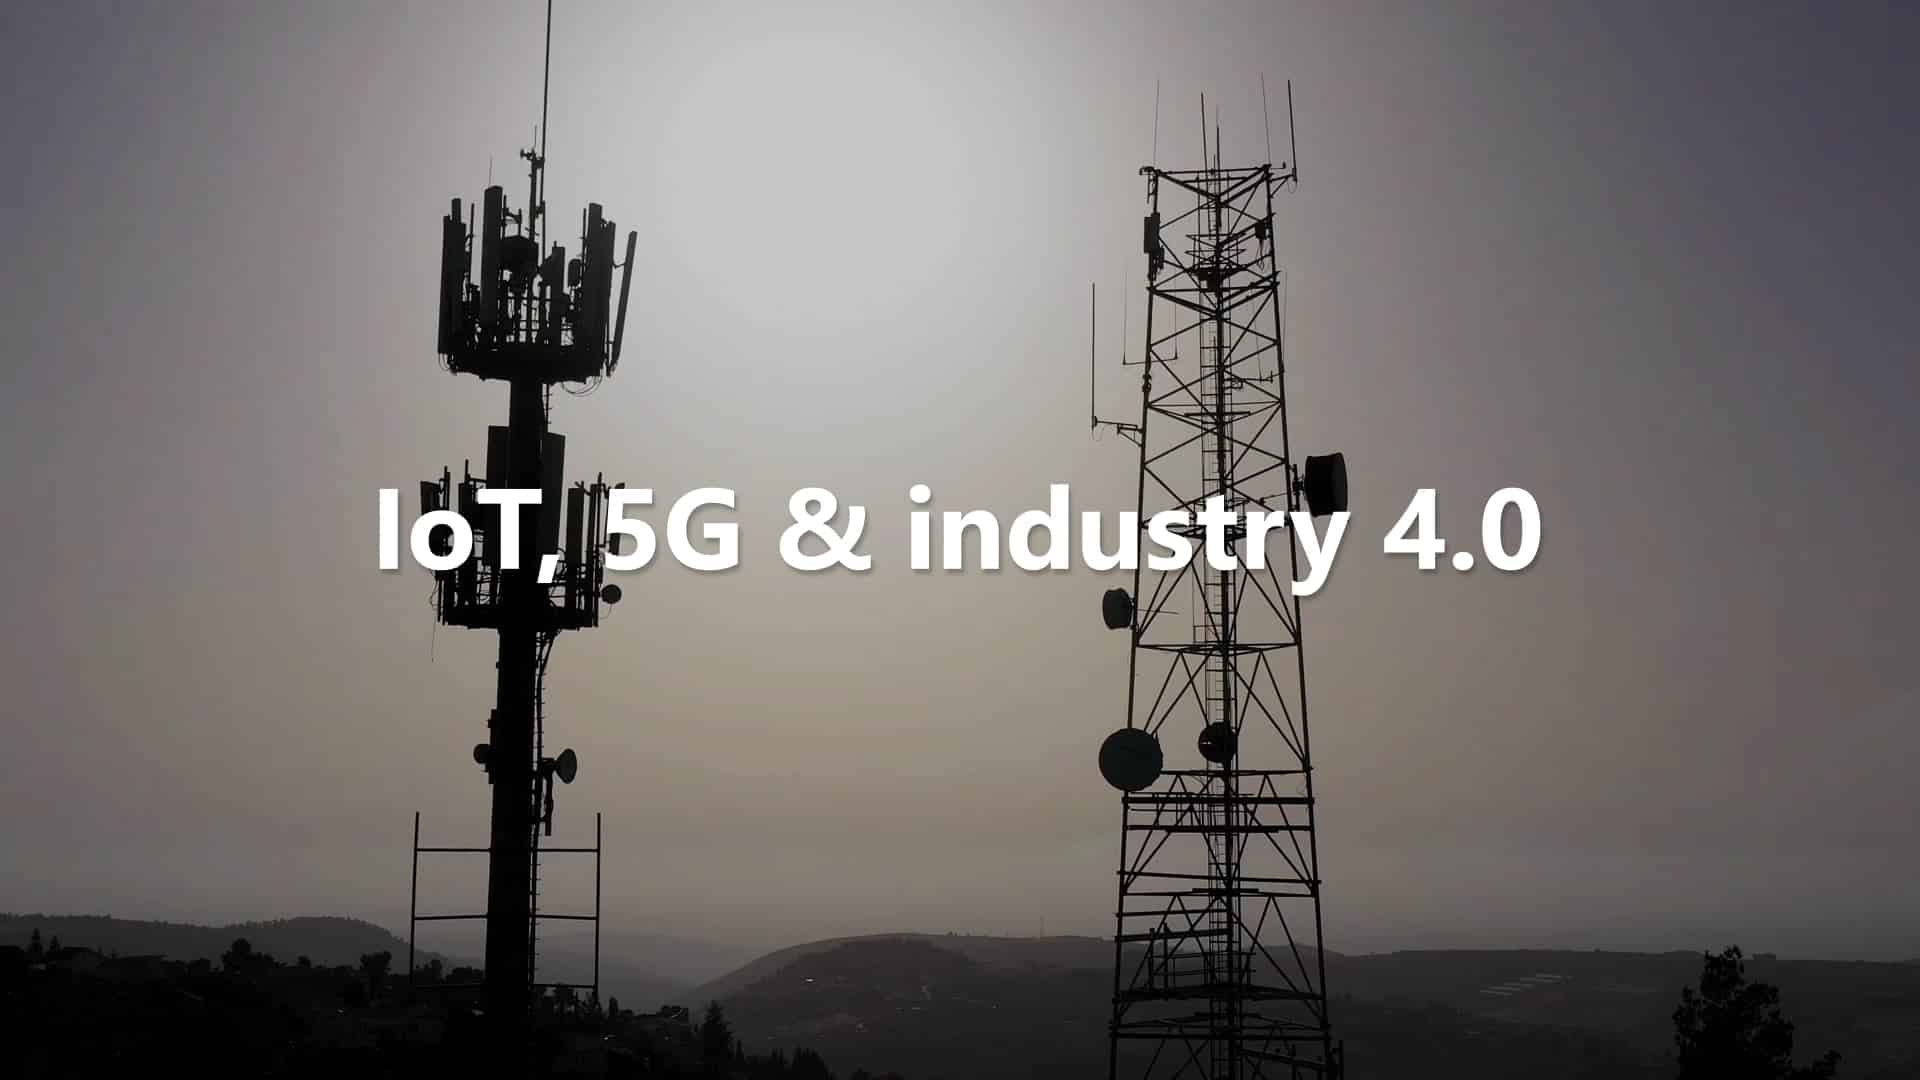 video thumbnail of two data towers with text IoT 5G Industry 4.0